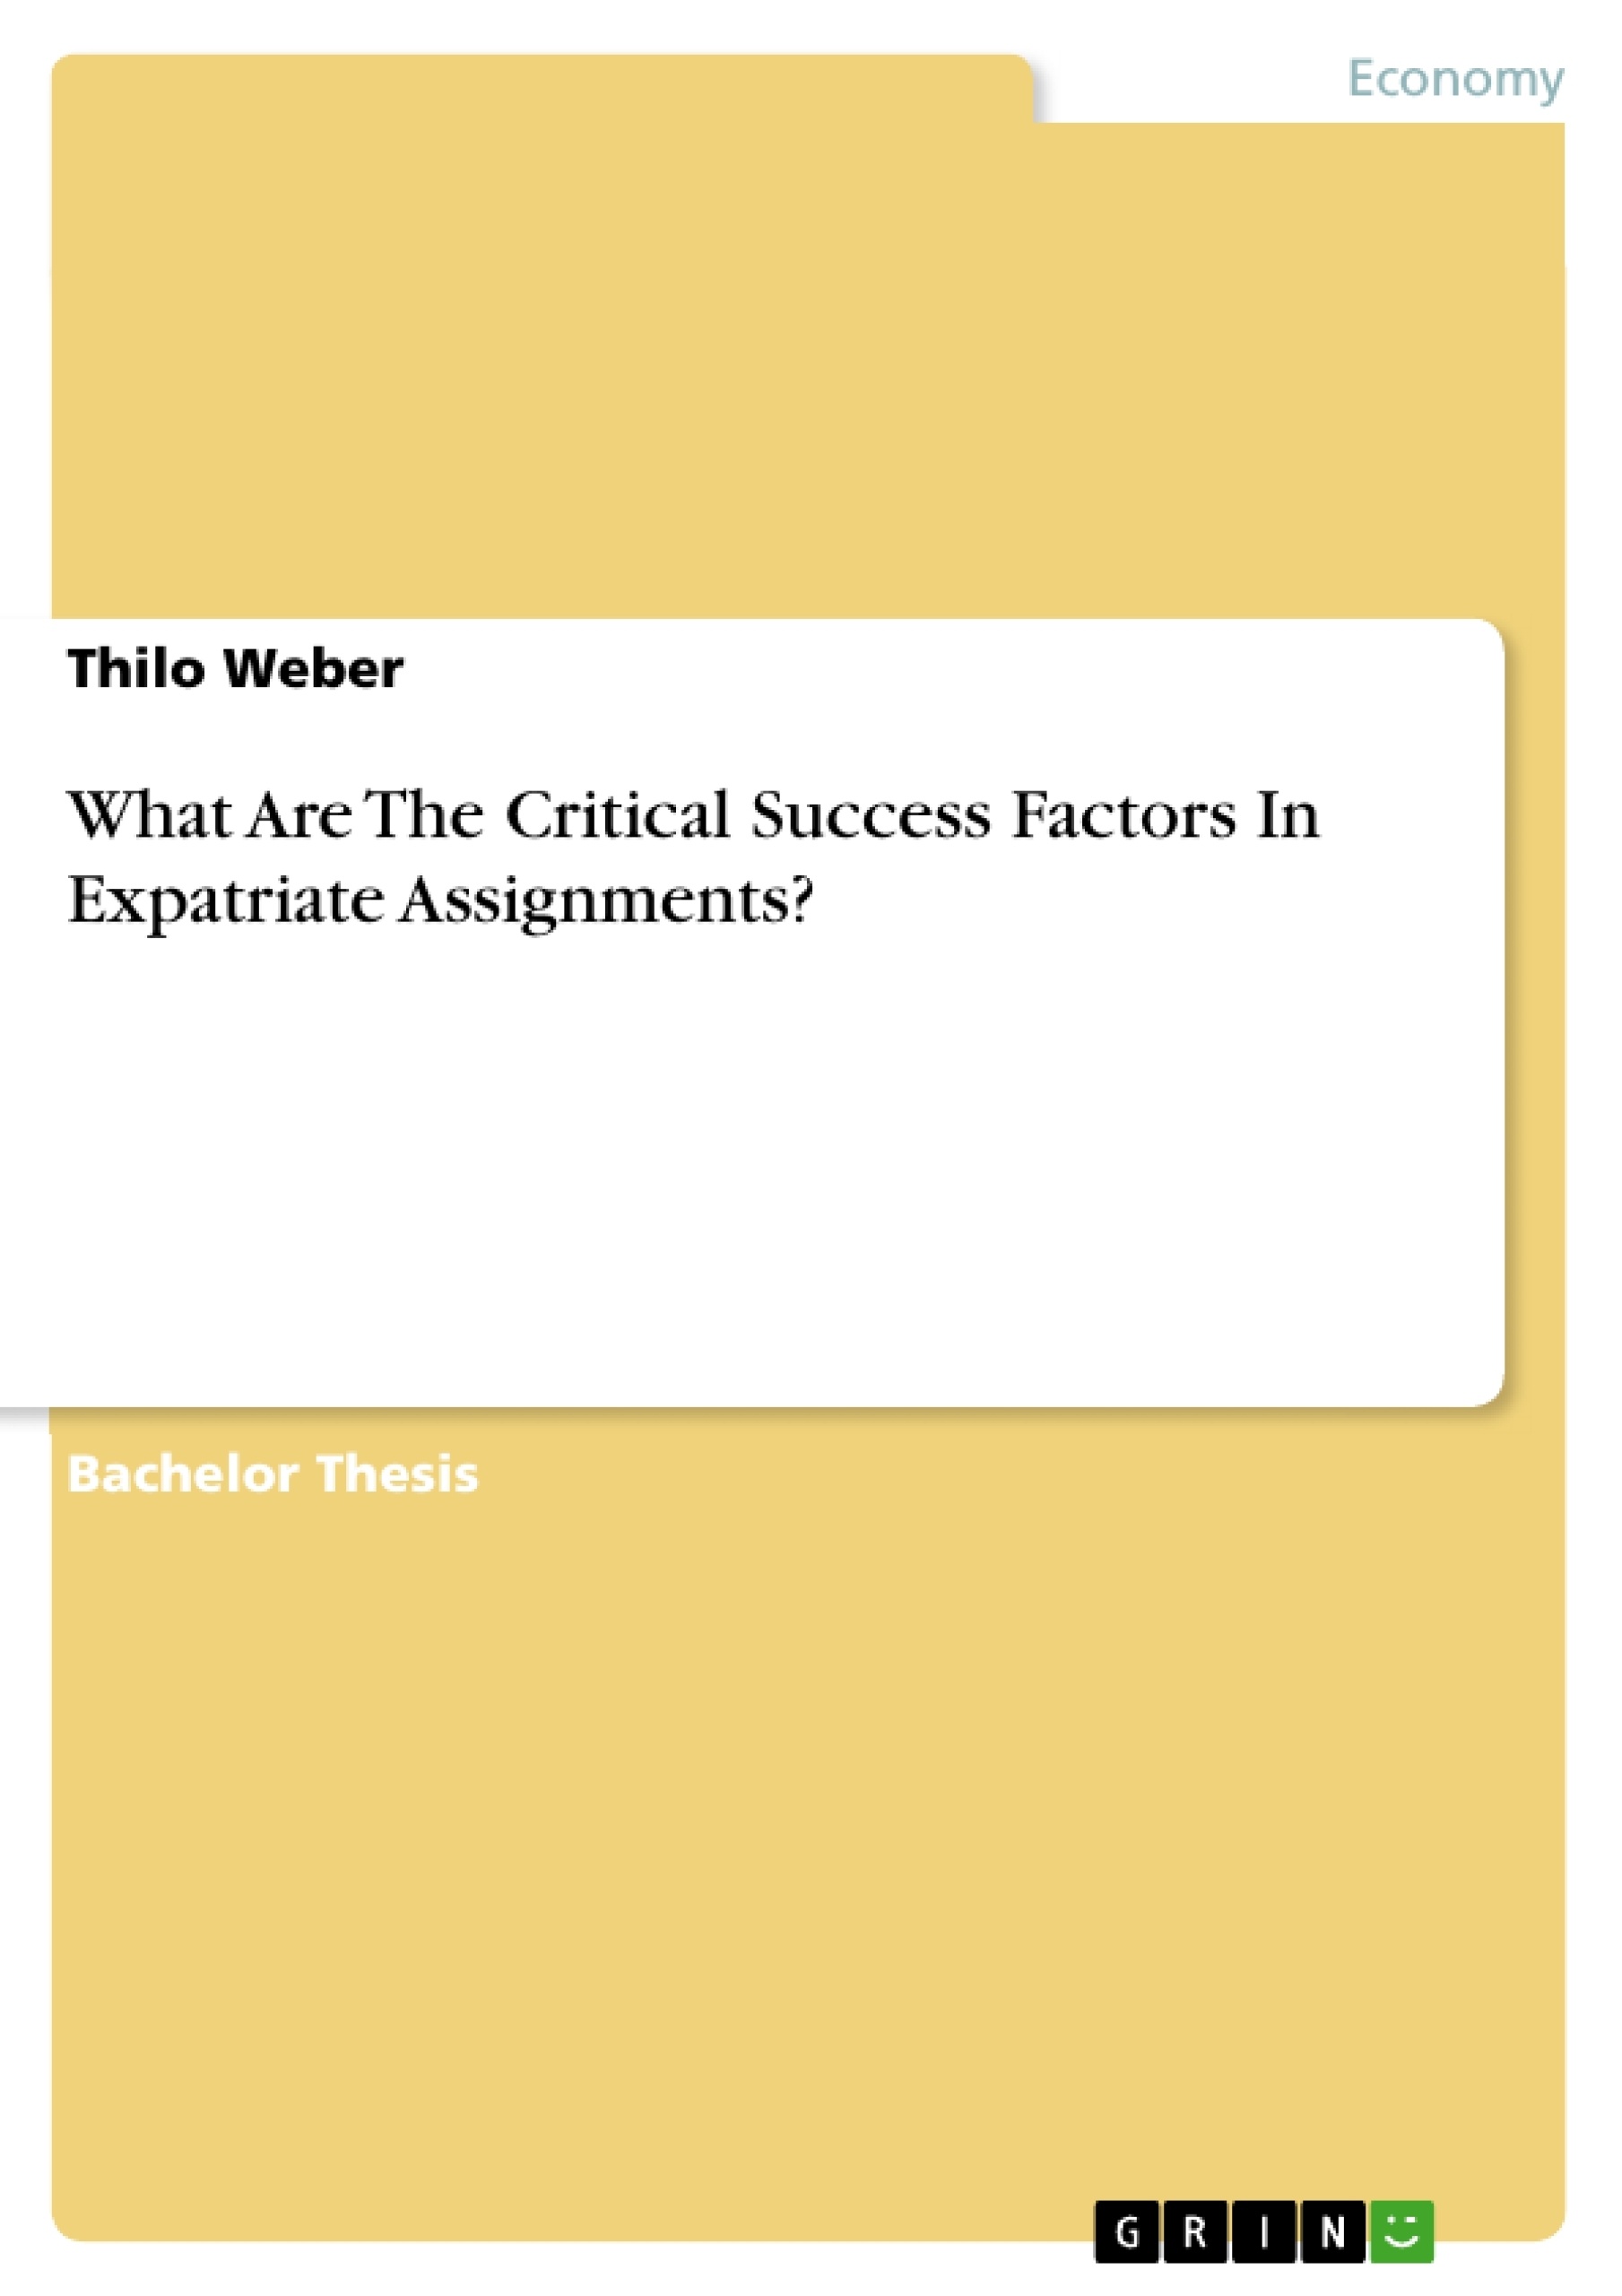 Title: What Are The Critical Success Factors In Expatriate Assignments?